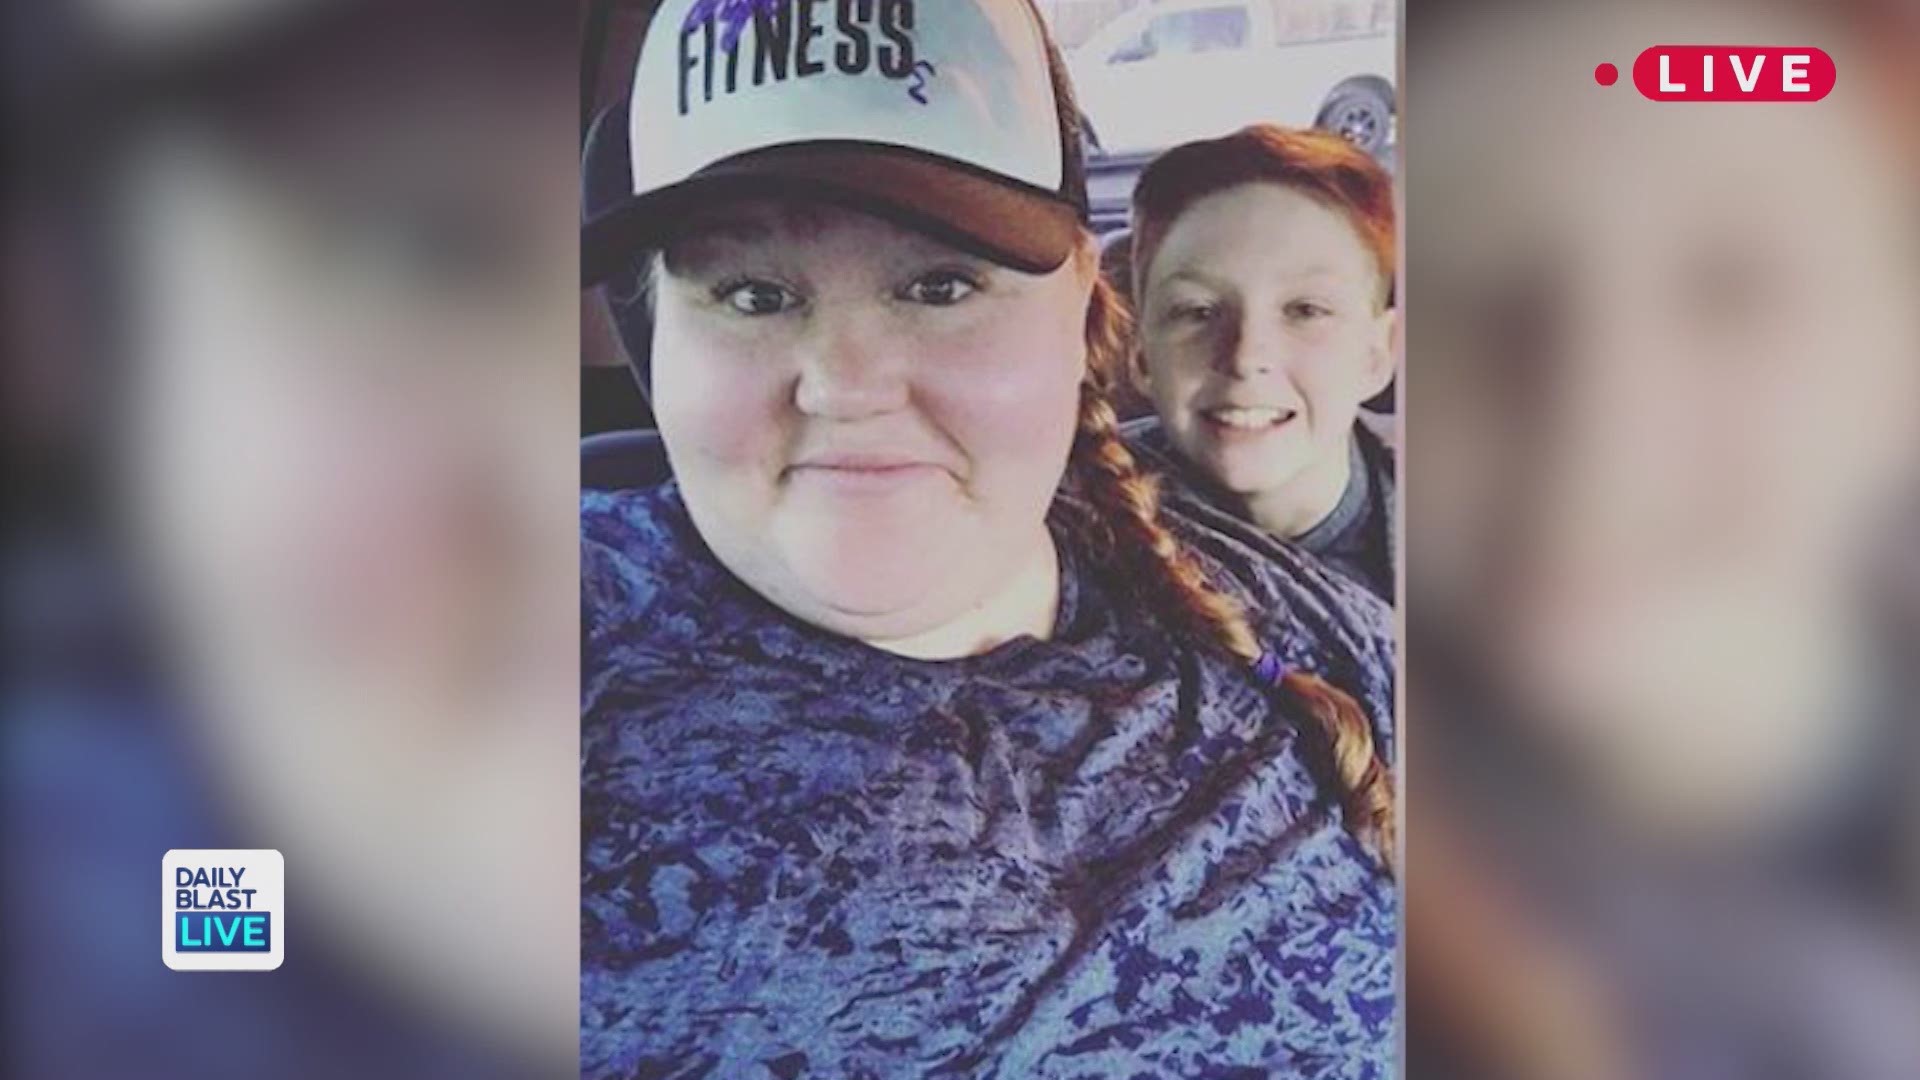 Mandi Holden heard someone make a comment about her weight, so she decided to stick up for herself and share a message of kindness online.